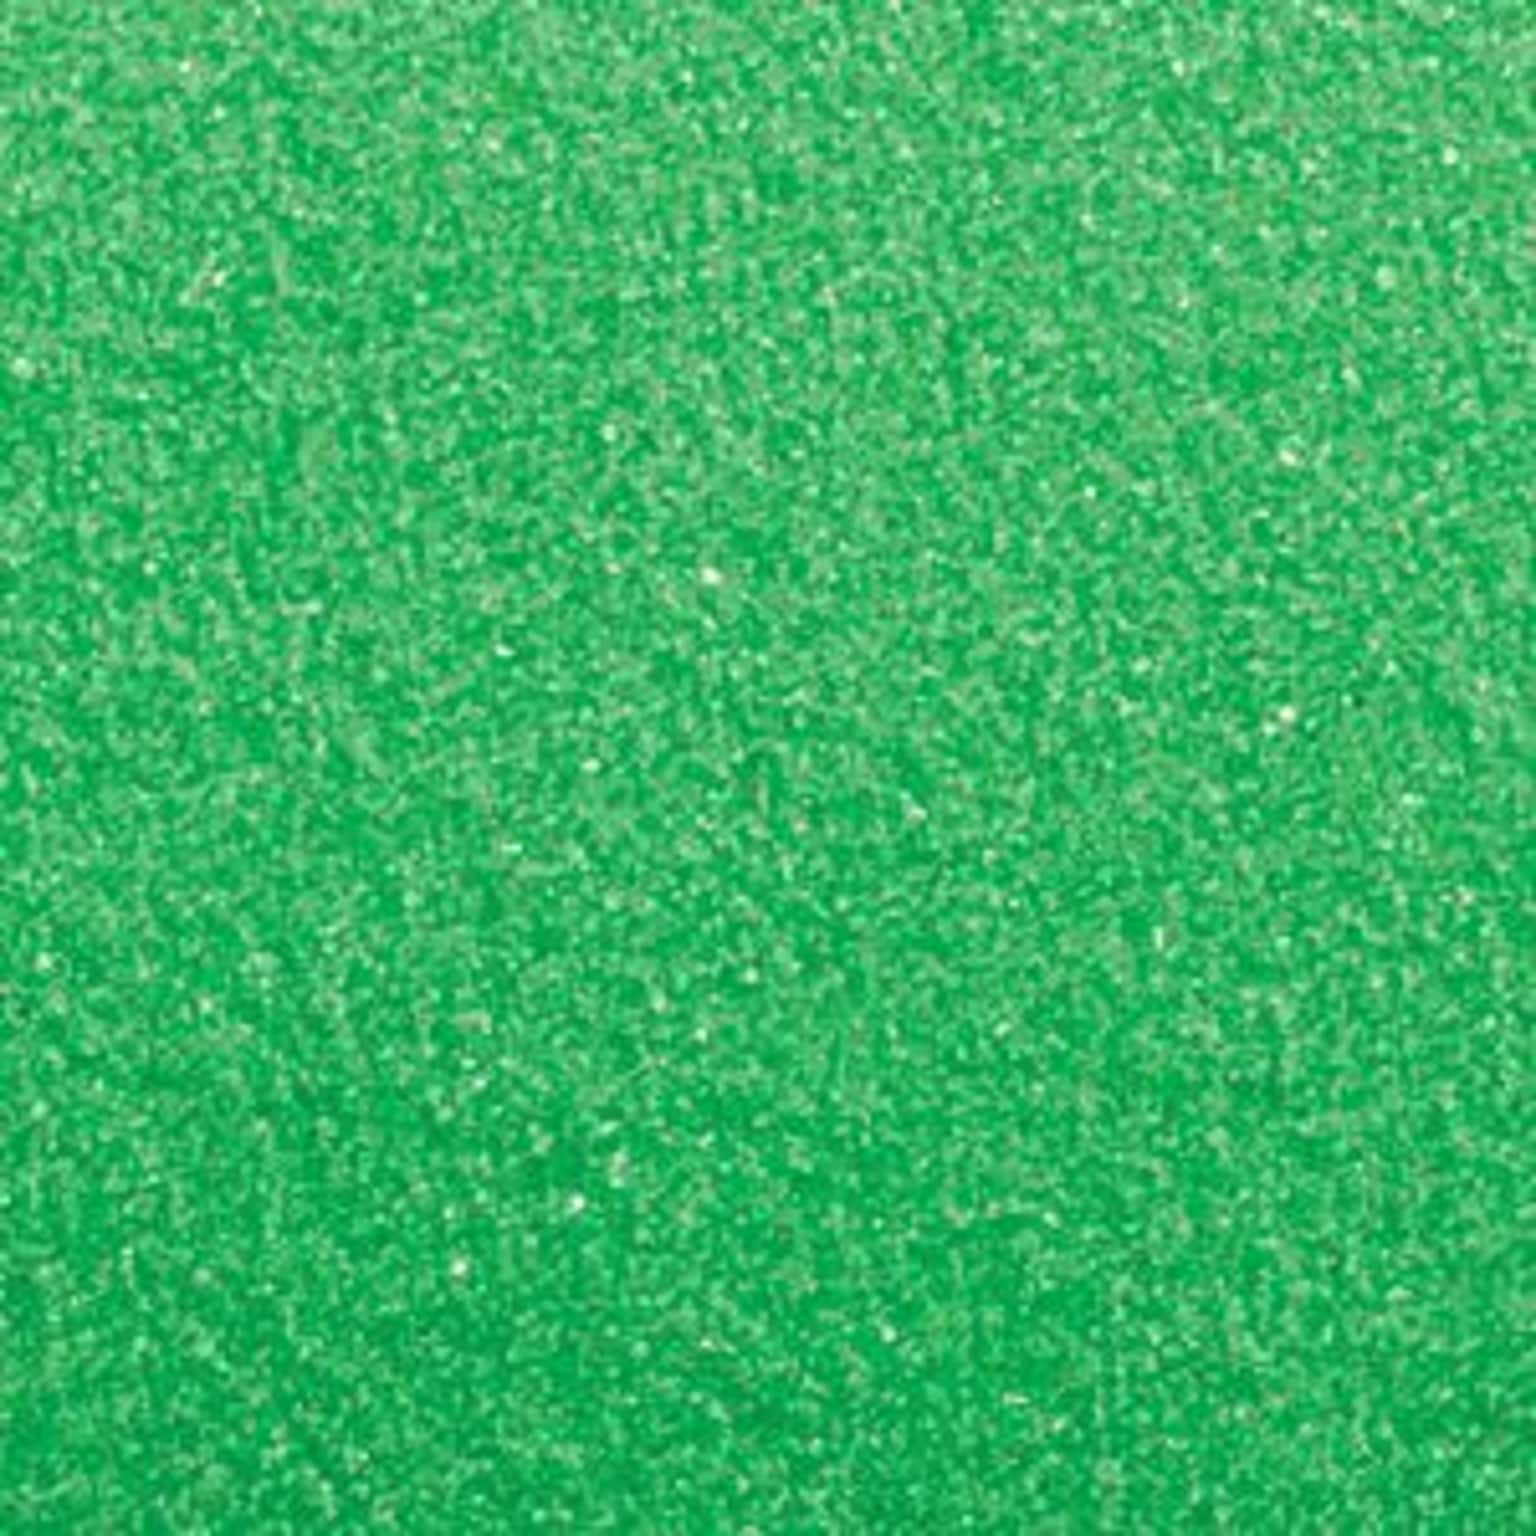 HBH™ 1 lbs. Colored Sand, Green